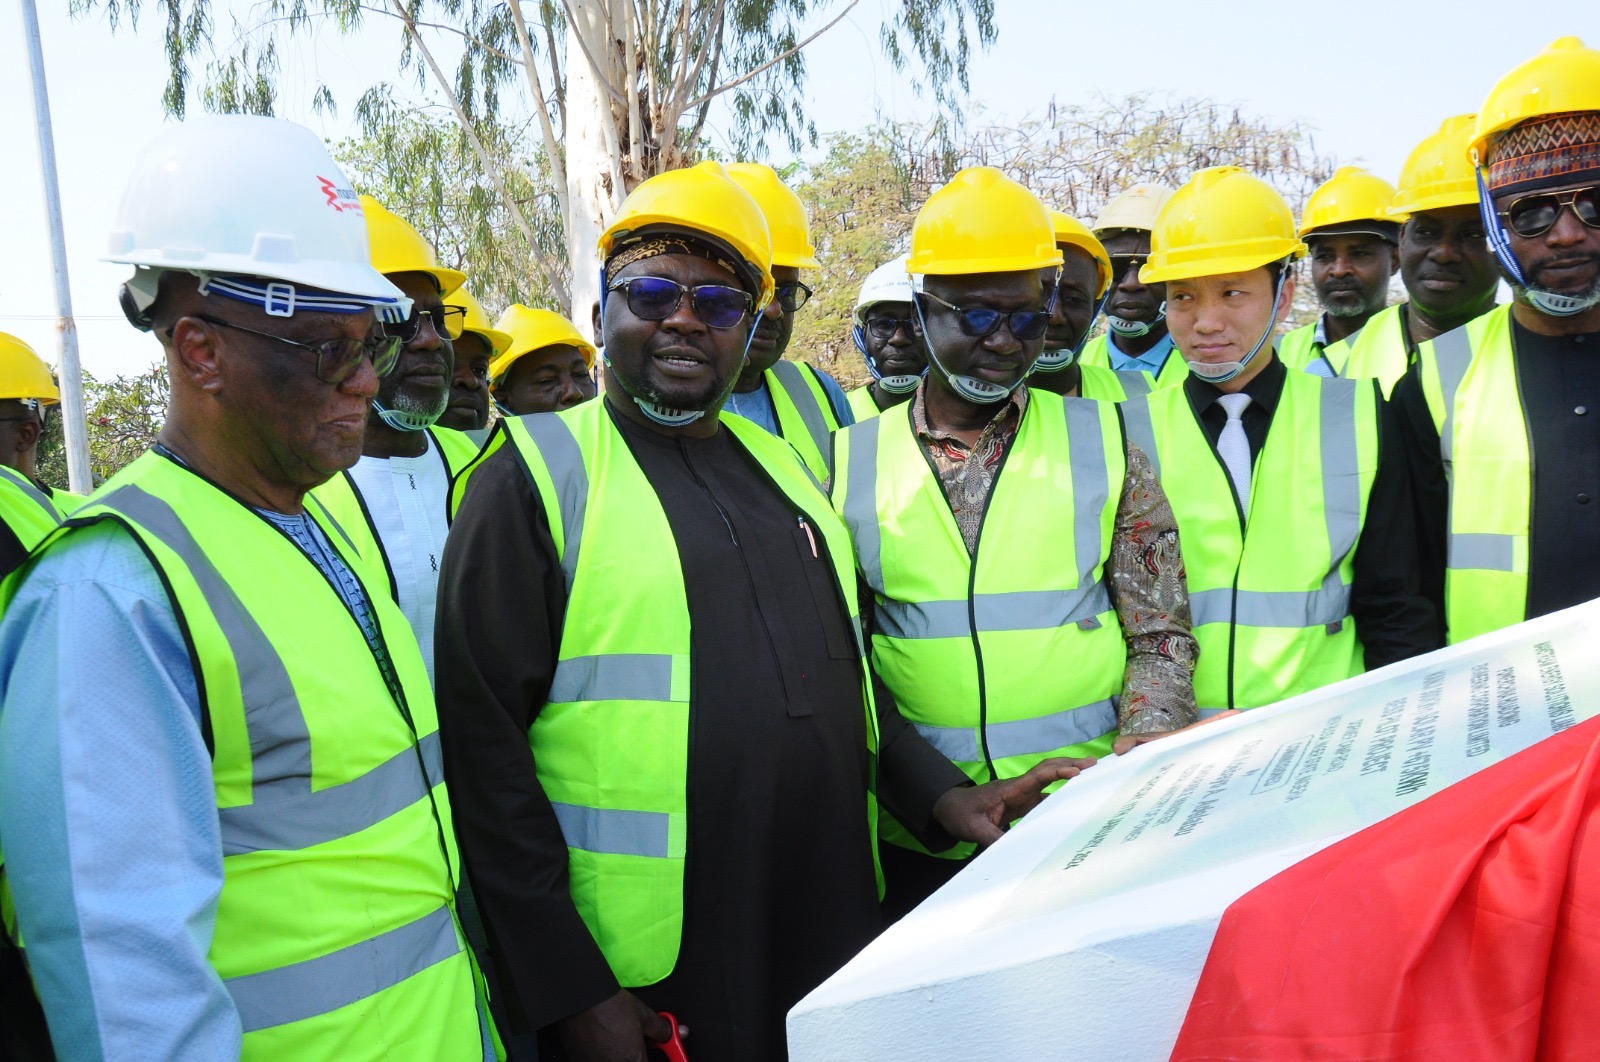 FG expands power generation in Kainji, commissions additional 300KWp power project*